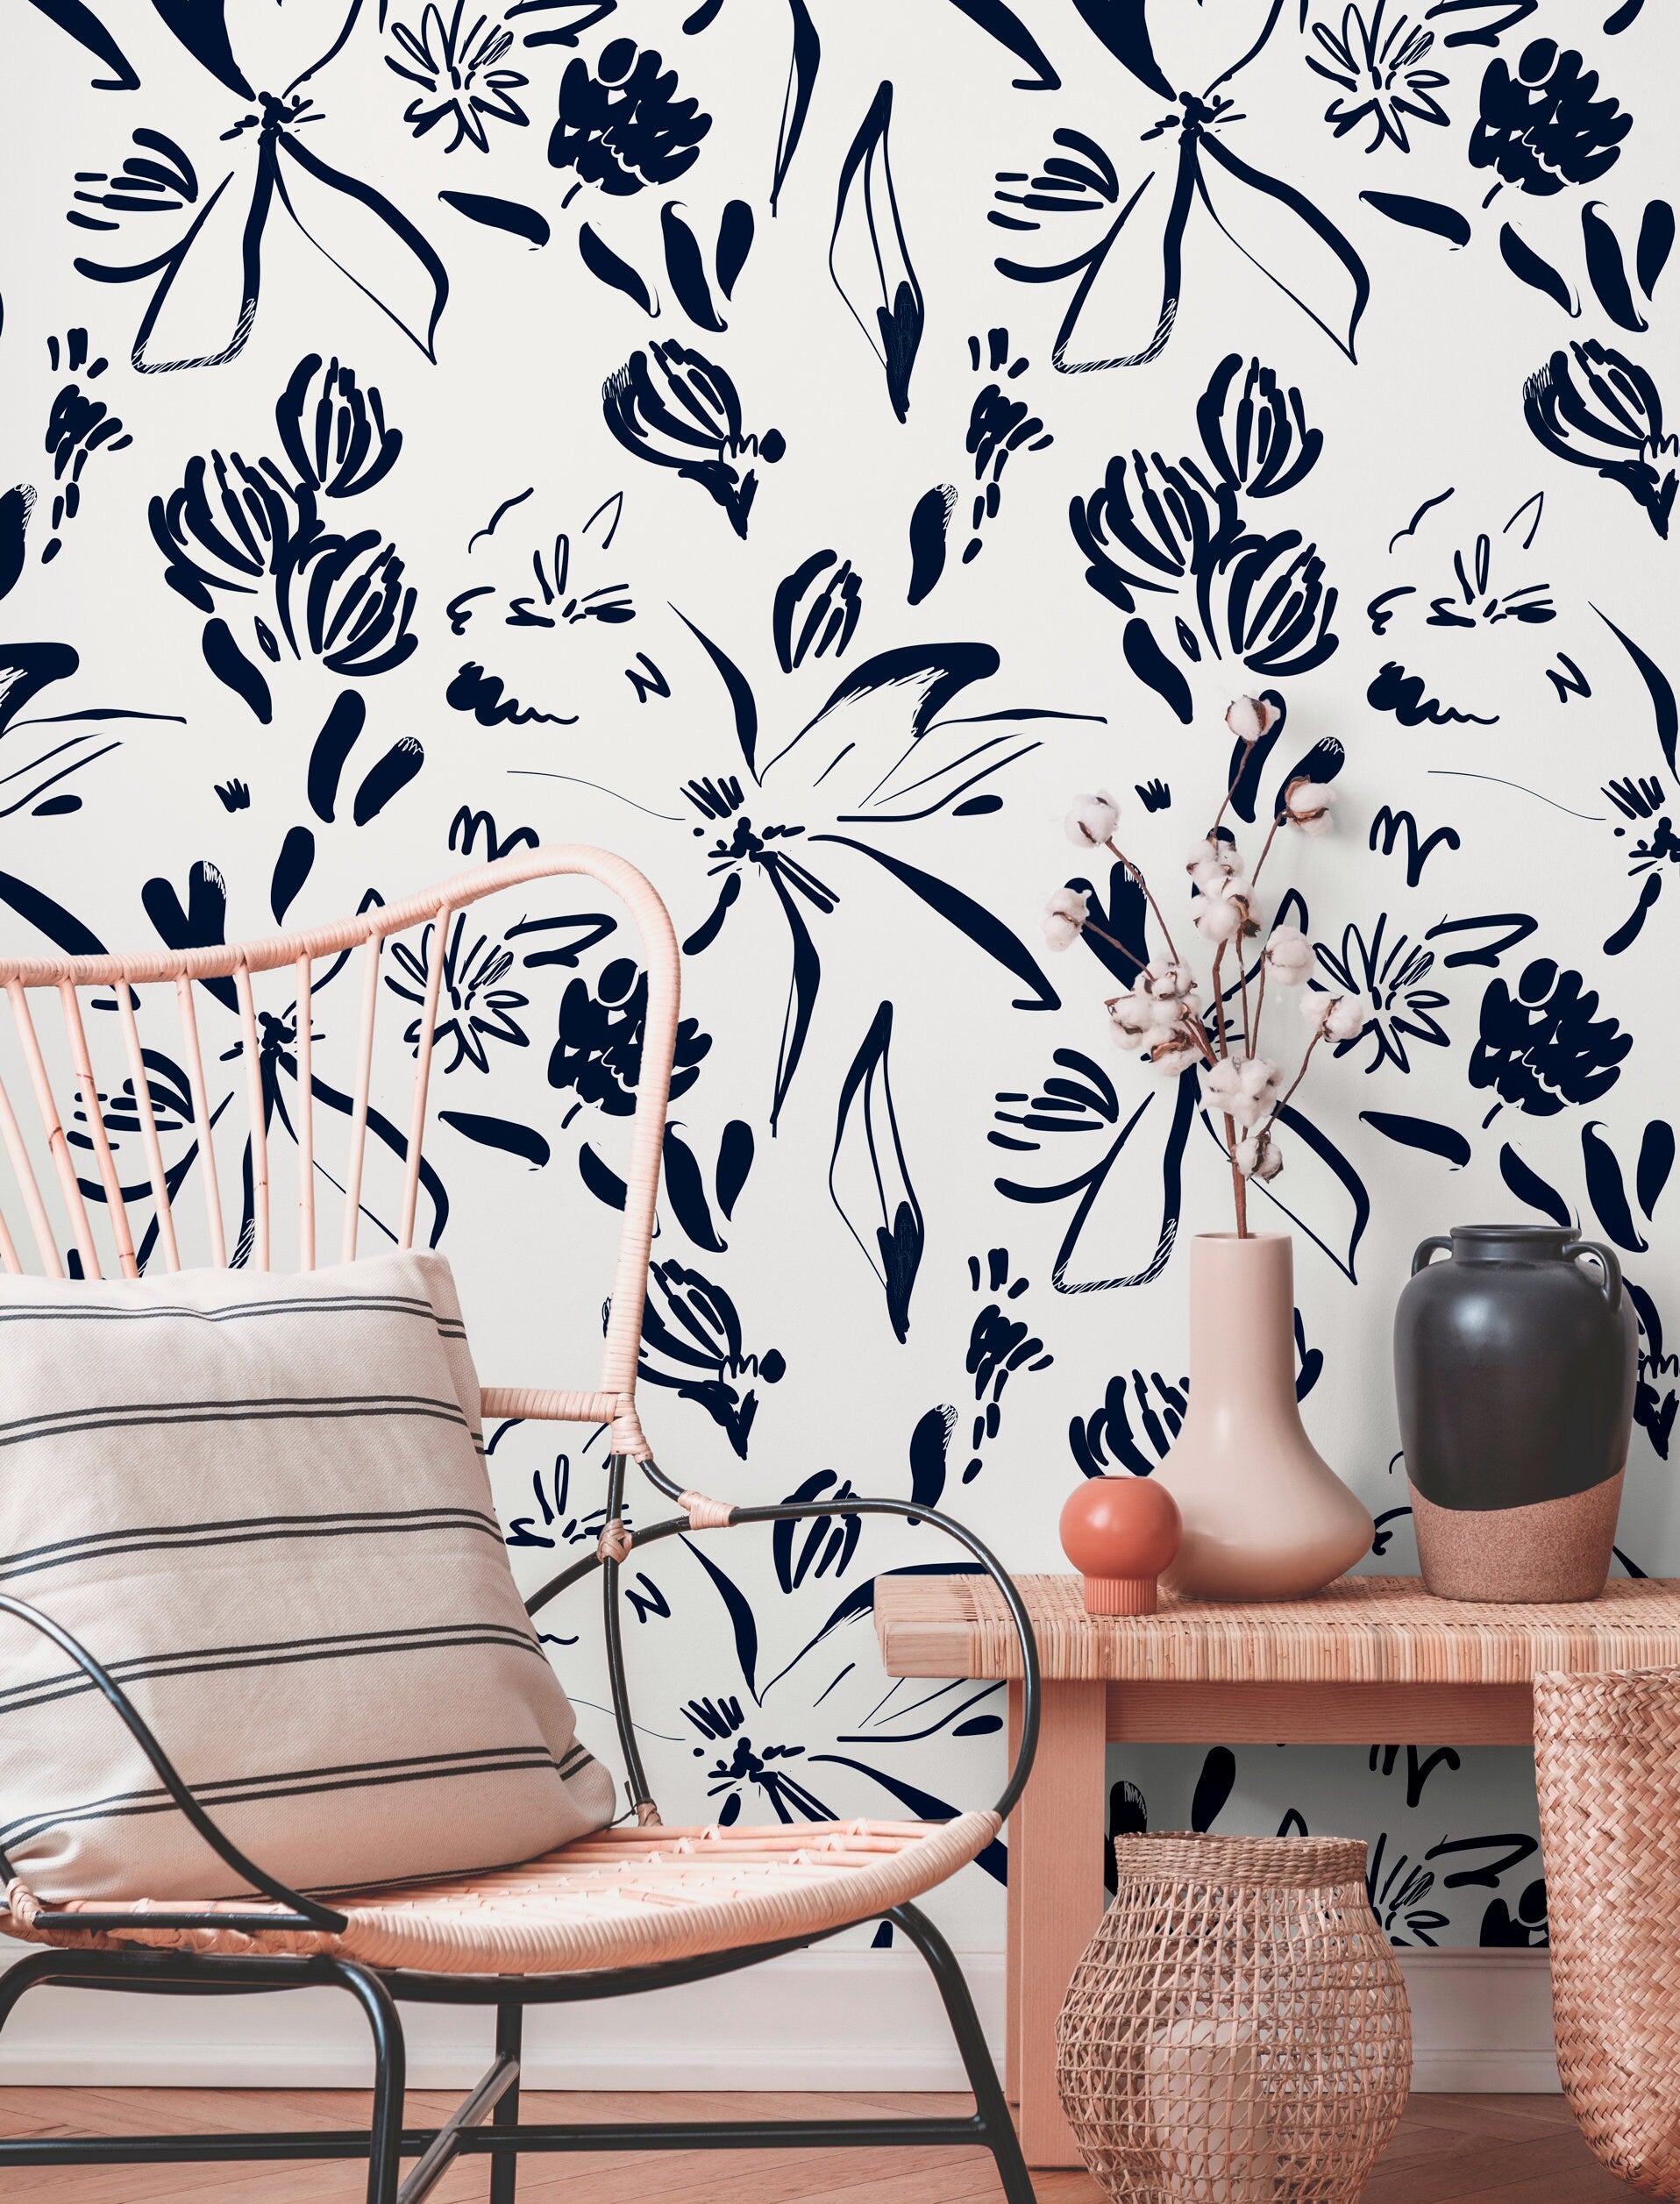 Wallpaper Peel and Stick Wallpaper Removable Wallpaper Home Decor Wall Art Wall Decor Room Decor / Navy Contemporary Boho Wallpaper - C383